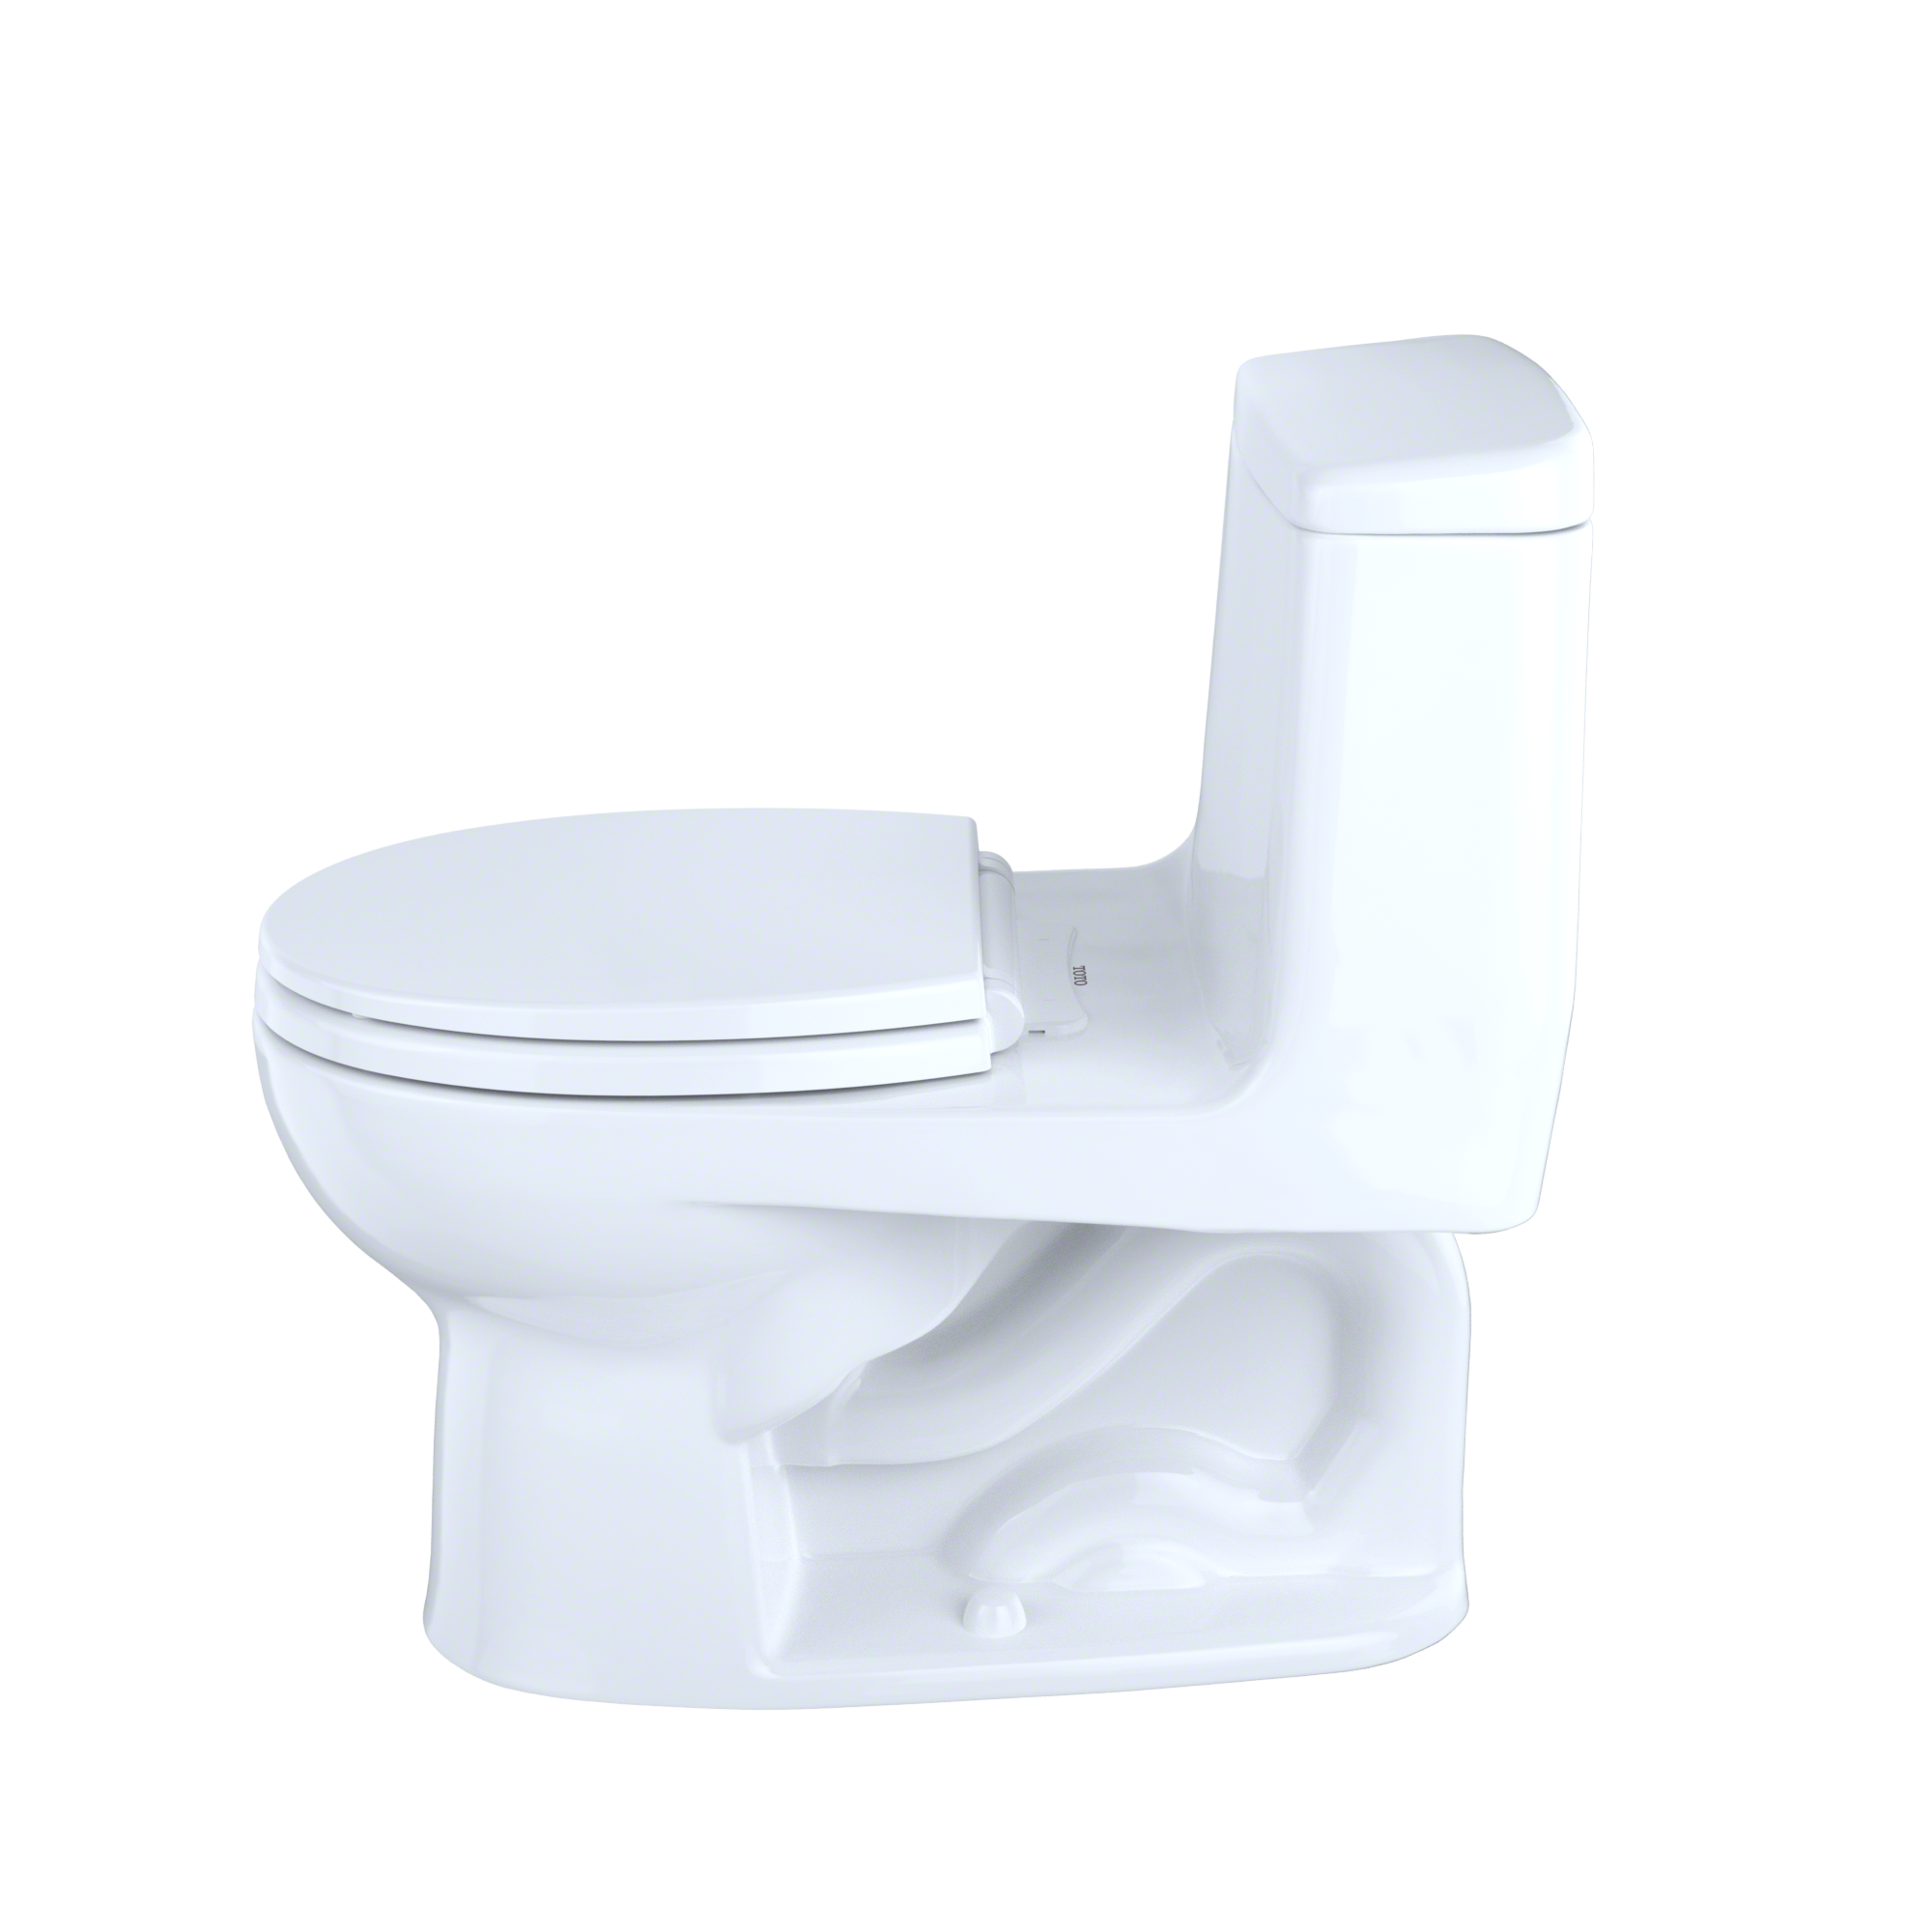 Toto Ms853113s Ultramax 1.6 Gpf One Piece Round Toilet - - Cotton - image 4 of 5